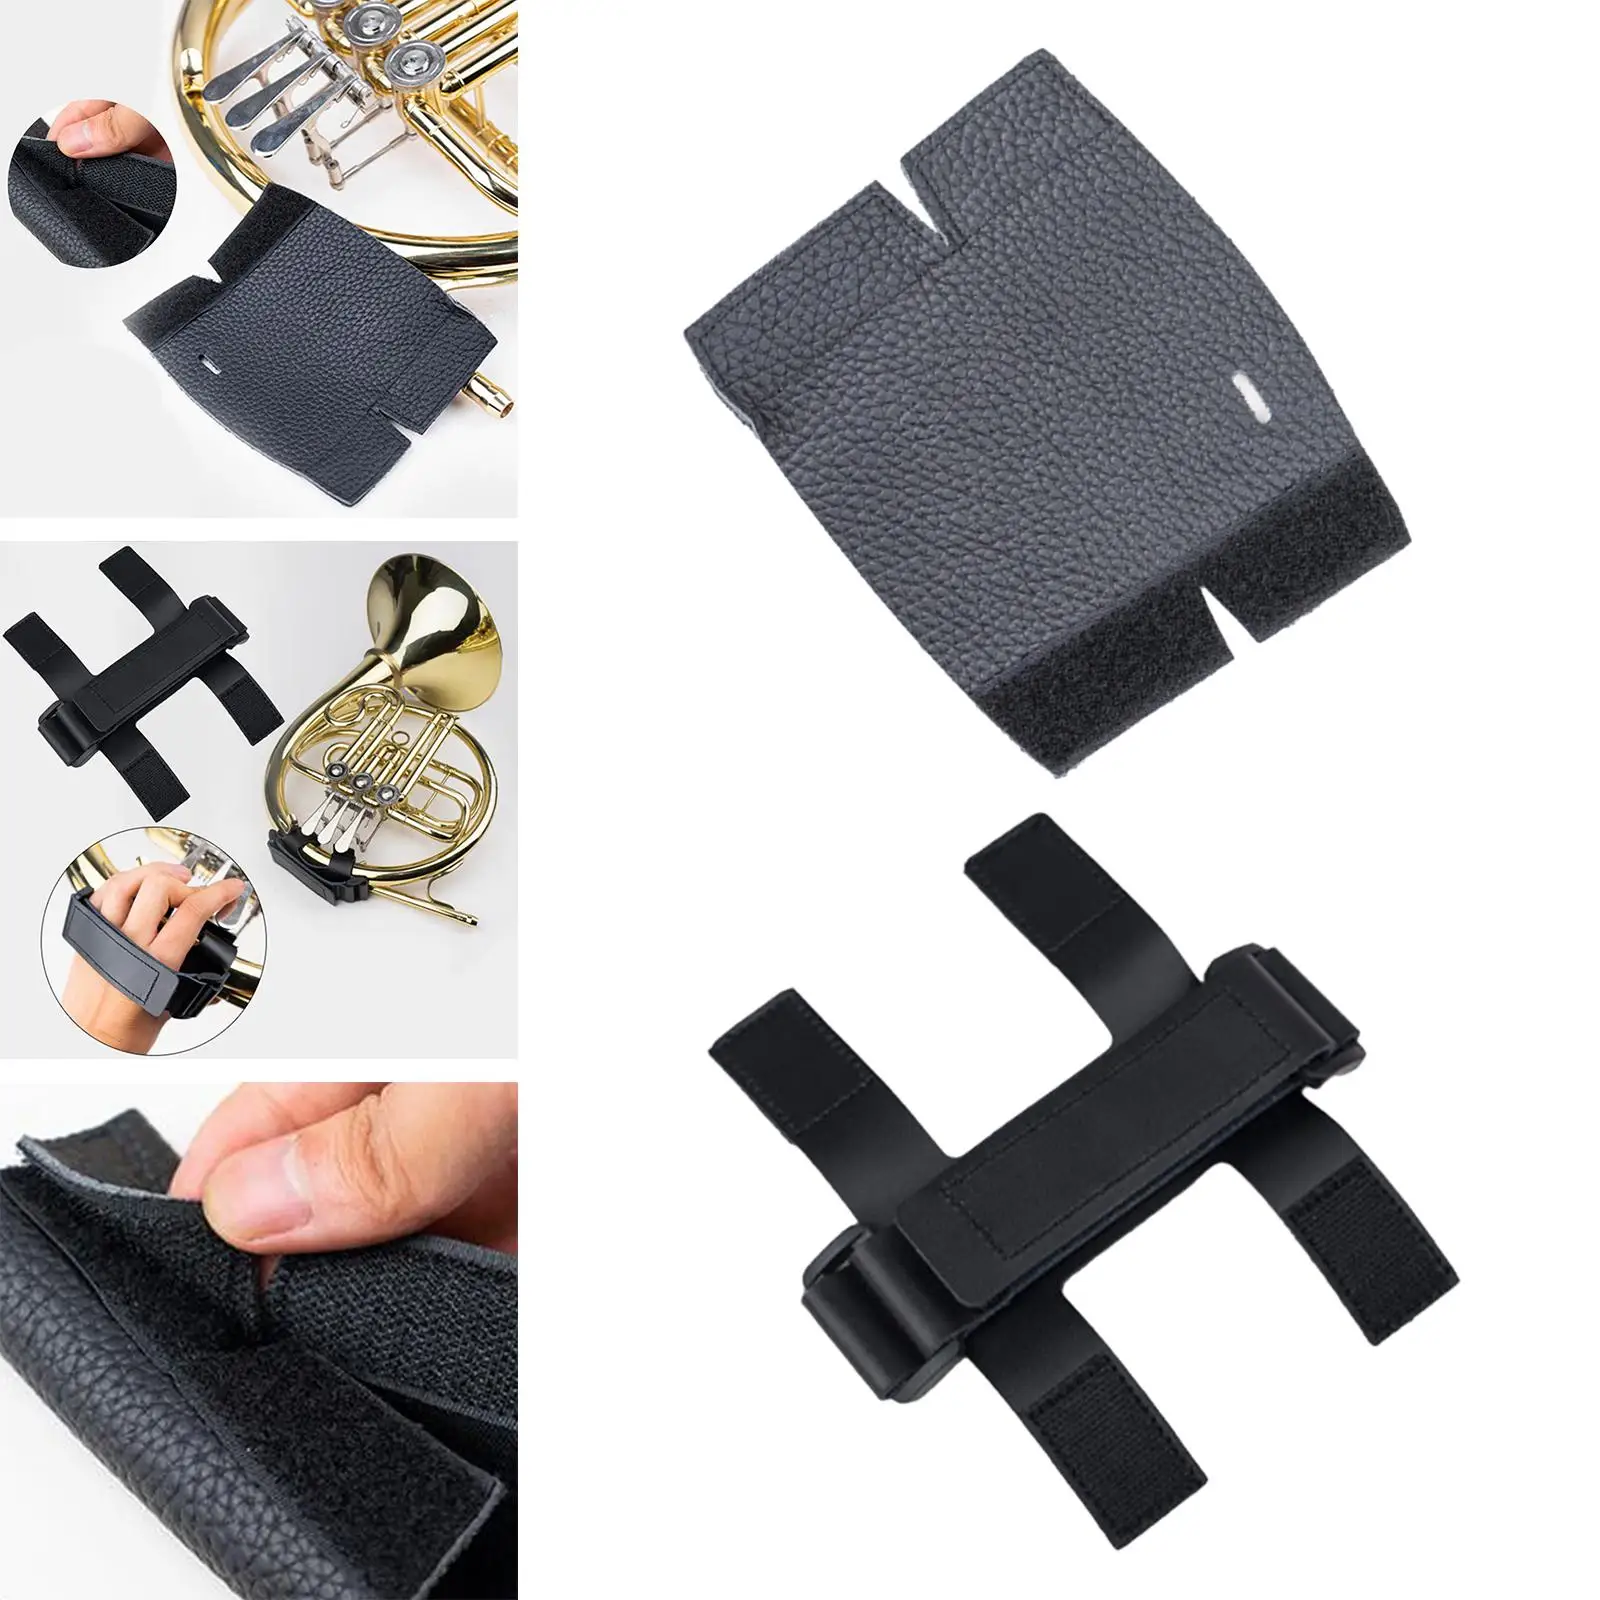 French Horn Hand Guard Portable Non Slip Brass Instrument Accessory PU Leather Wrap Cover for Stage Performance Practice